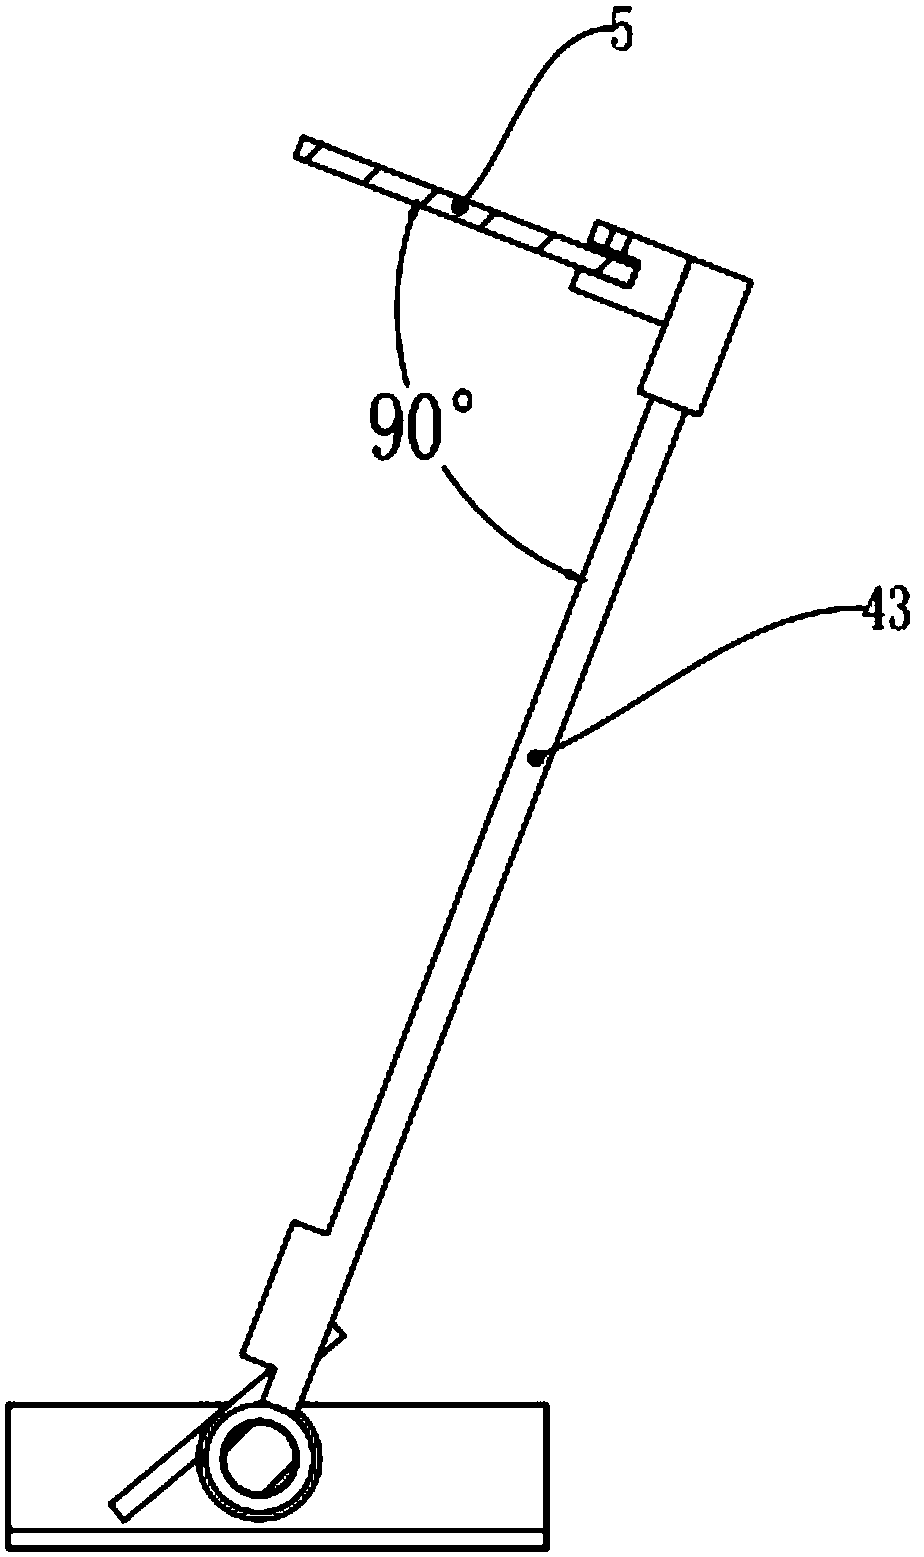 Scraping device capable of adjusting stations